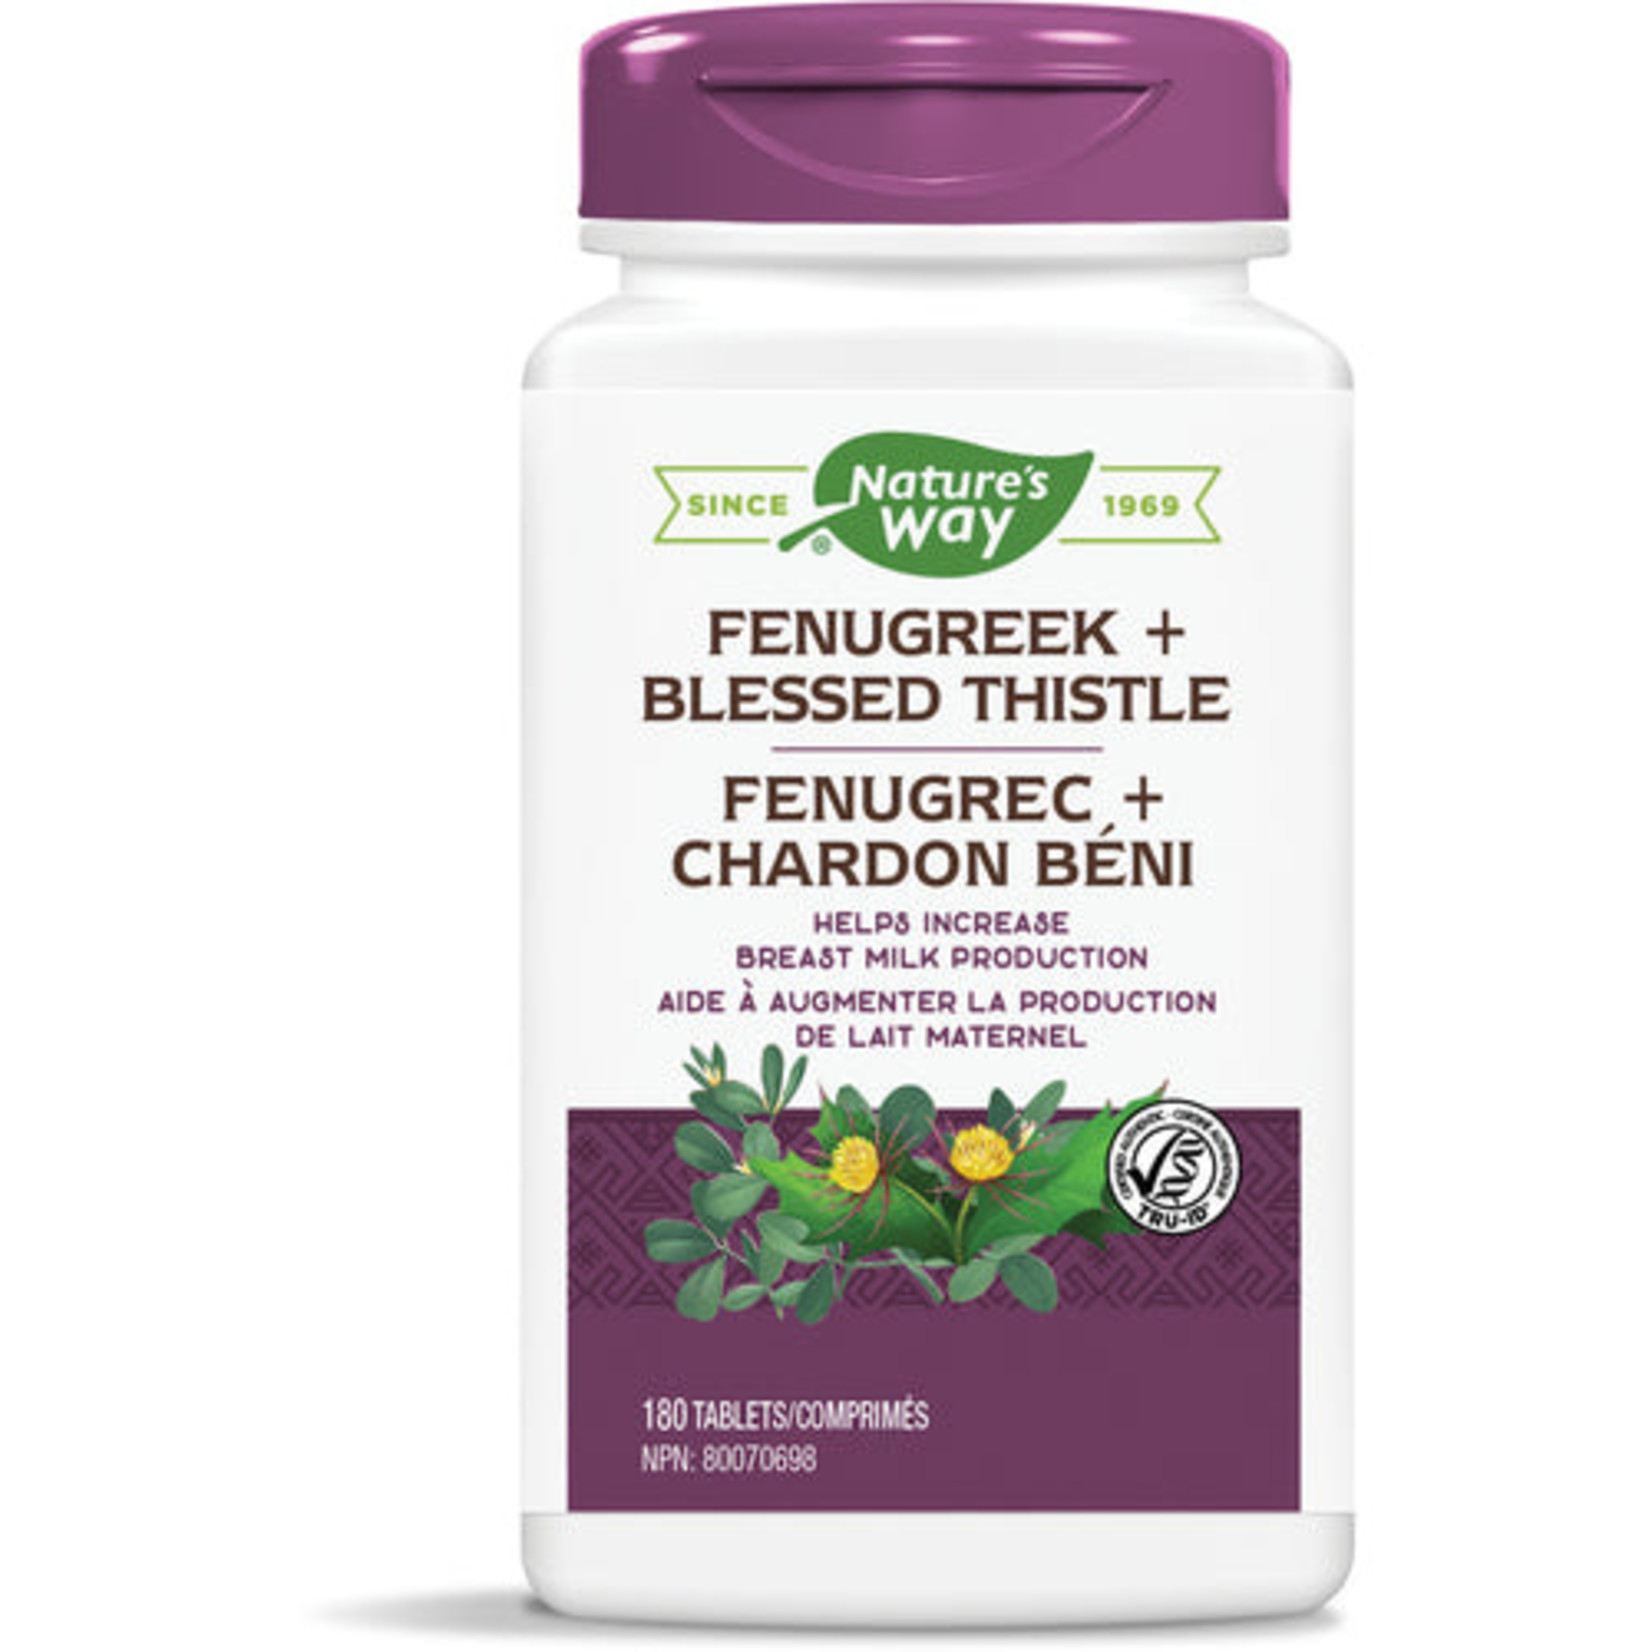 NATURES WAY NATURE'S WAY FENUGREEK + BLESSED THISTLE 180 TABS